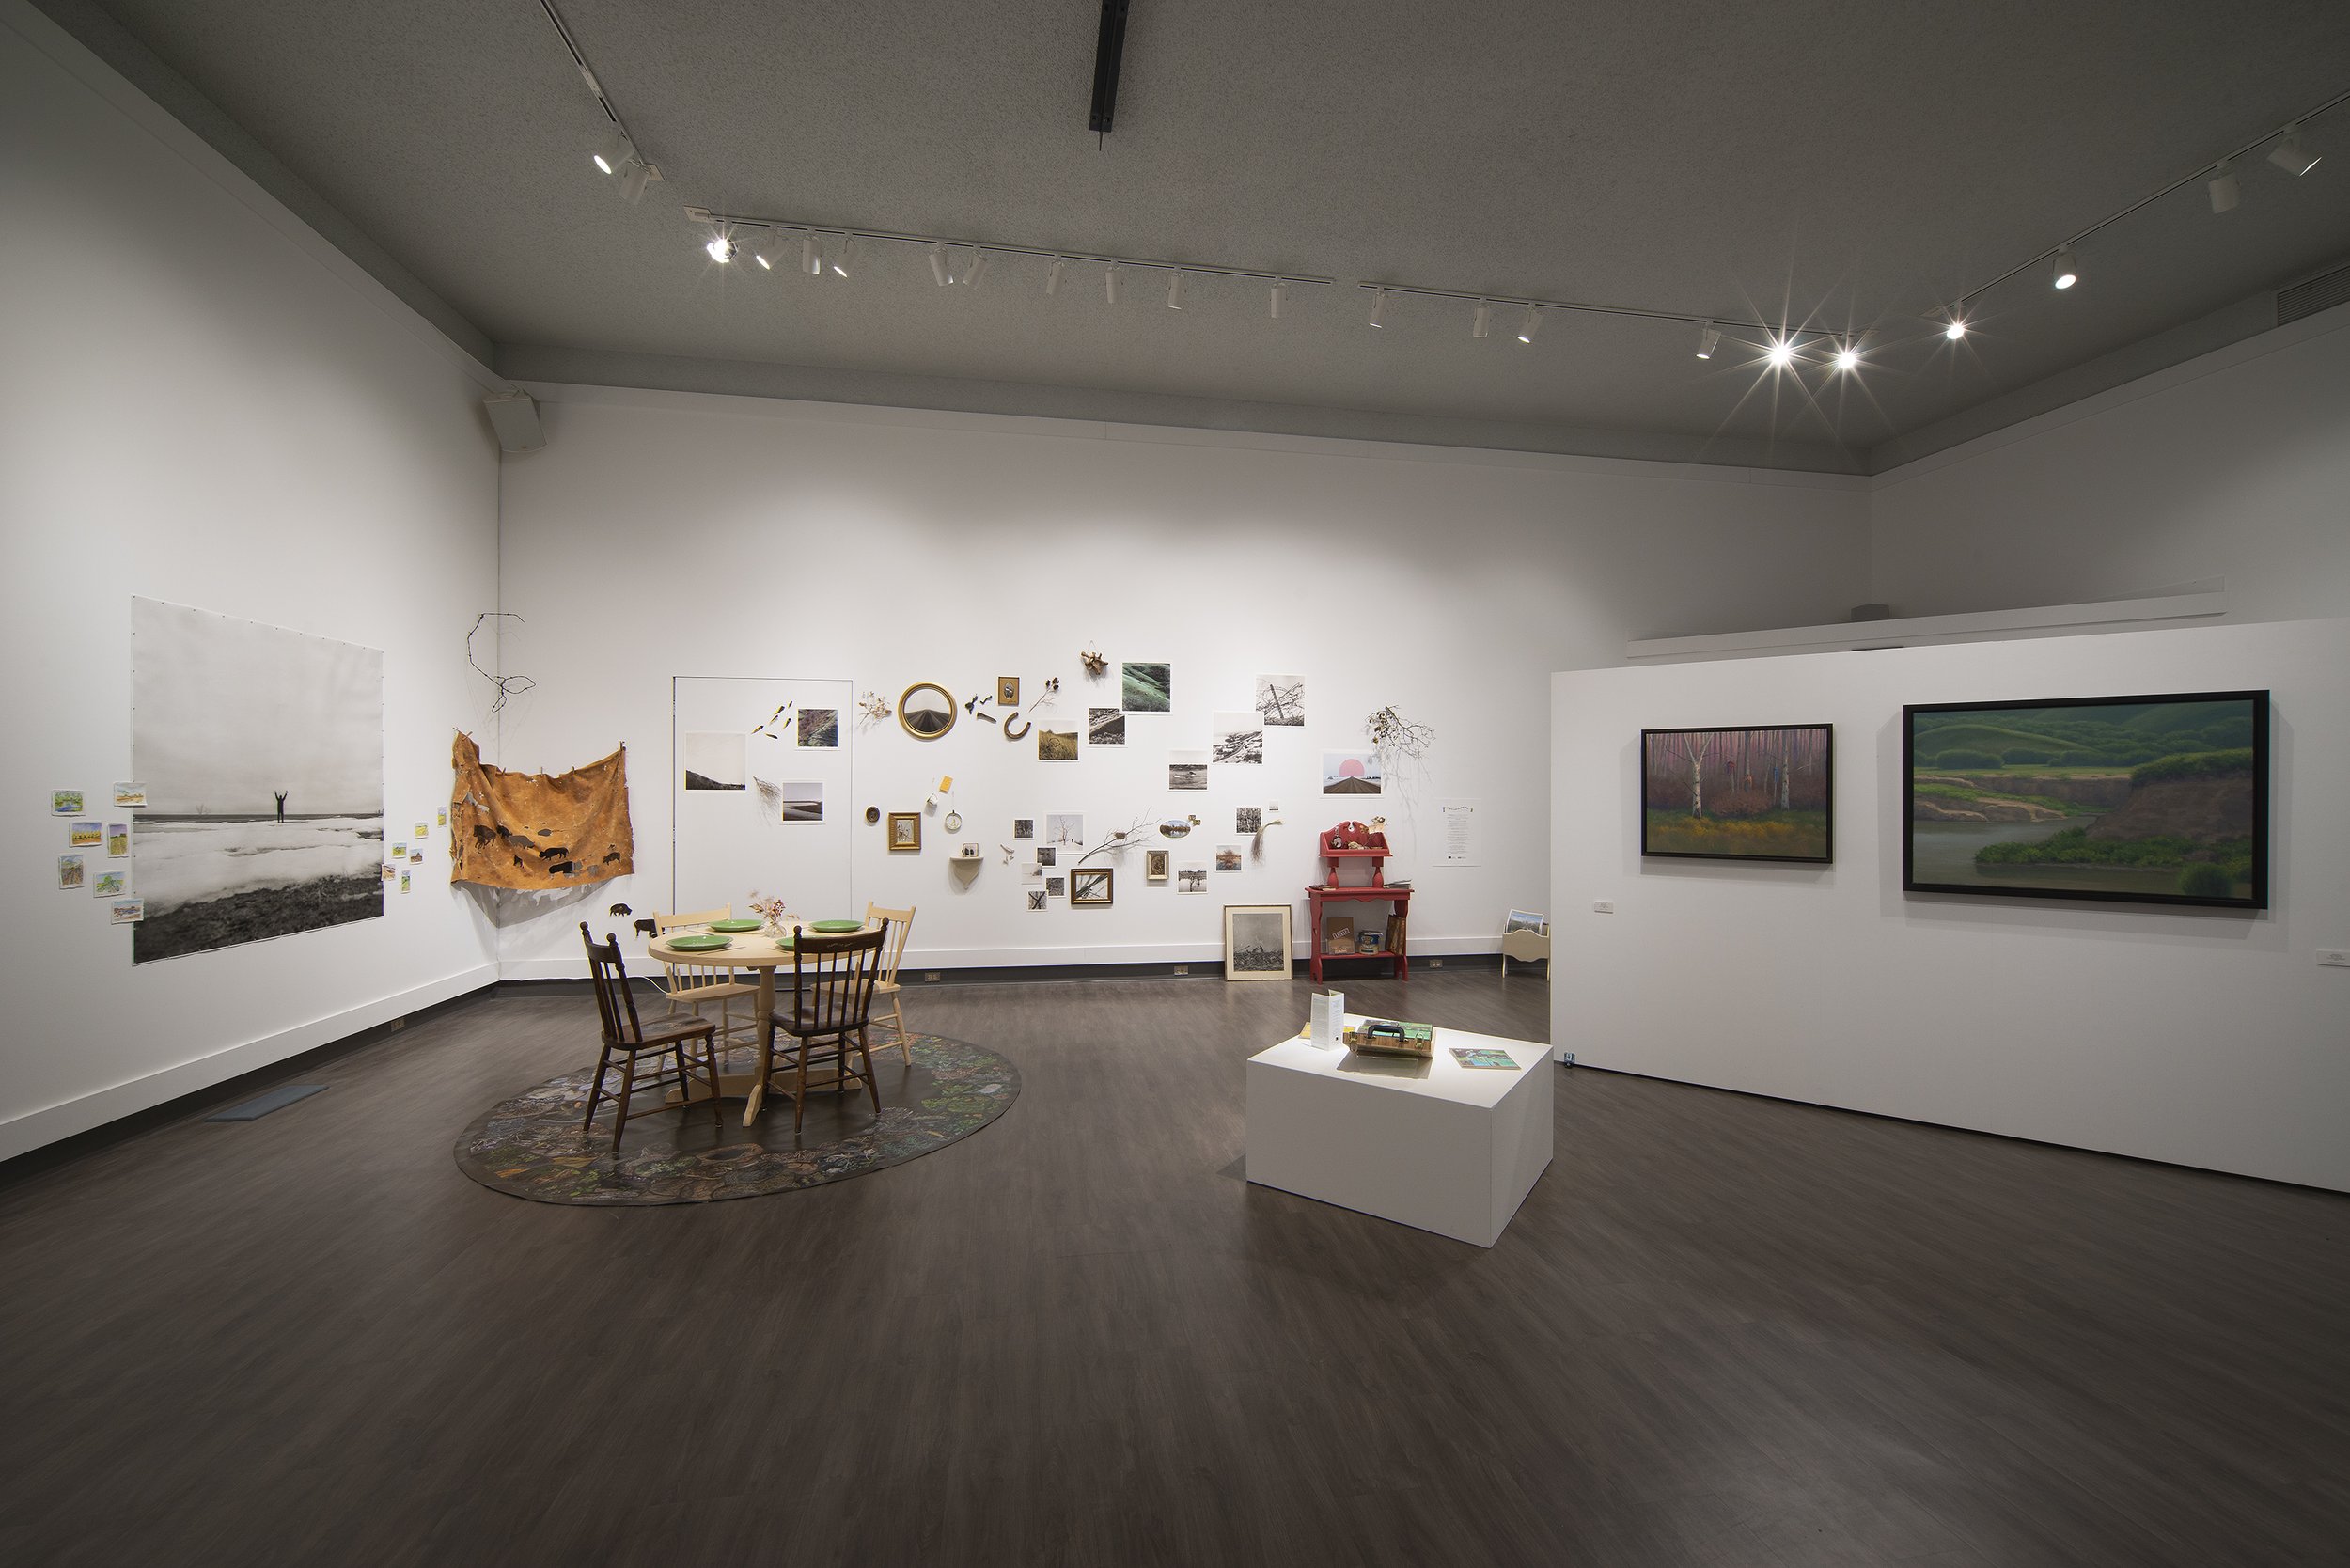  Installation image No. 1: “Where will the frogs sing?” at the Art Gallery of Regina group show View from the Edge of the World (2023). Please note the beauiful paintings of the late Michael Keepness on the right.  